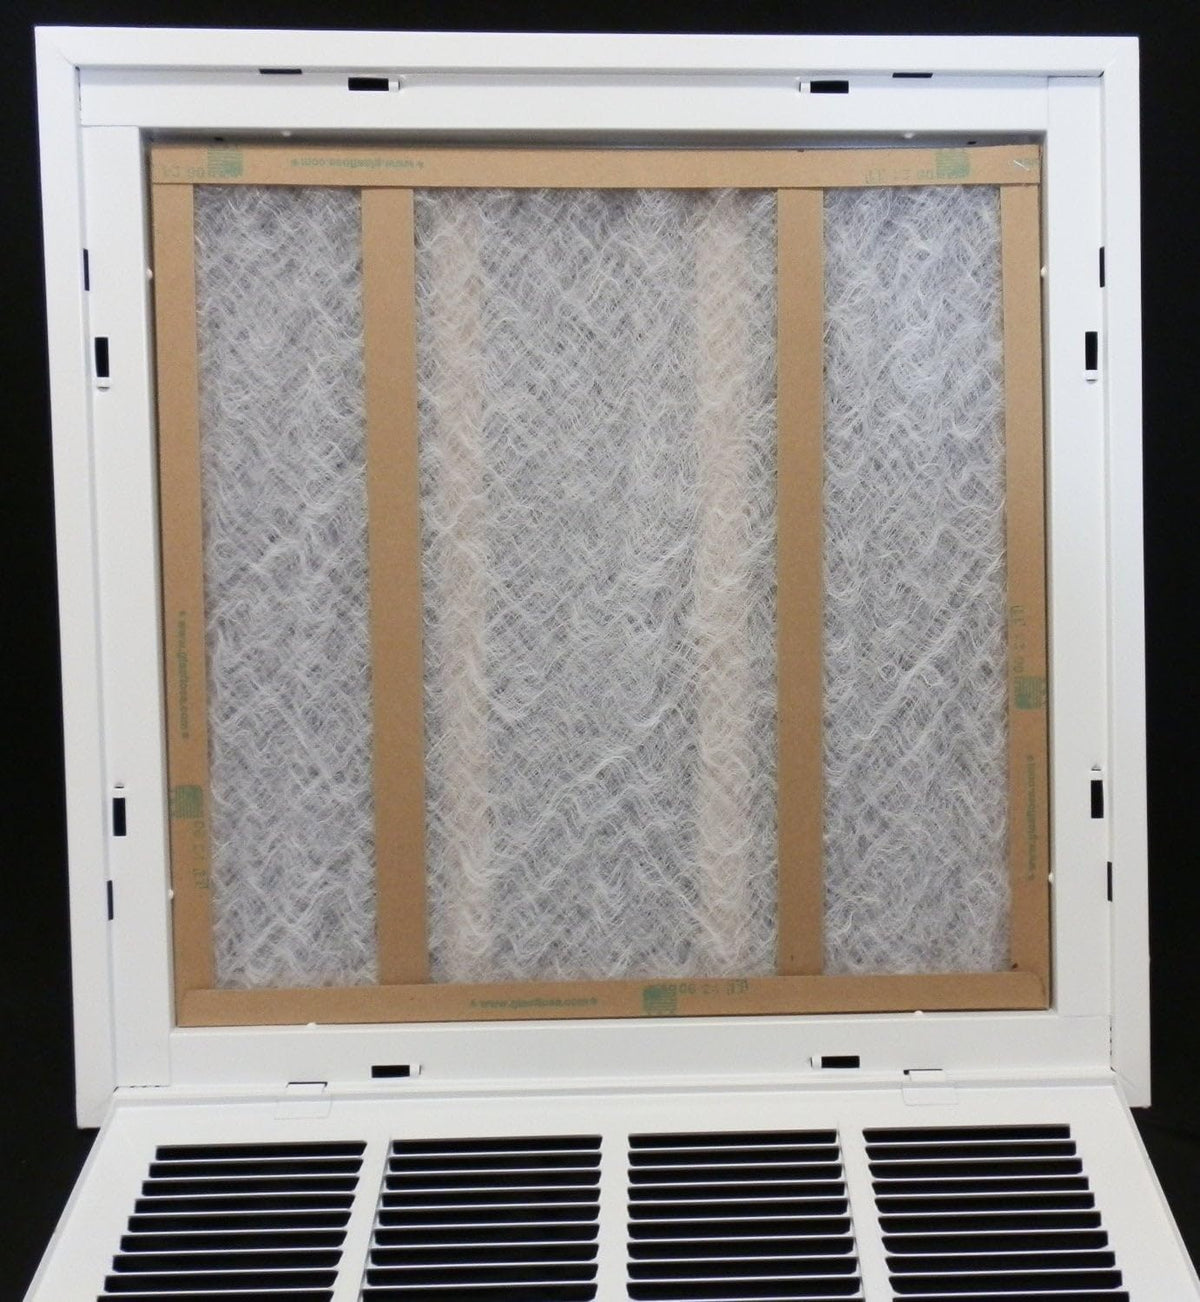 8&quot; X 22&quot; Steel Return Air Filter Grille for 1&quot; Filter - Removable Frame - [Outer Dimensions: 10 5/8&quot; X 24 5/8&quot;]